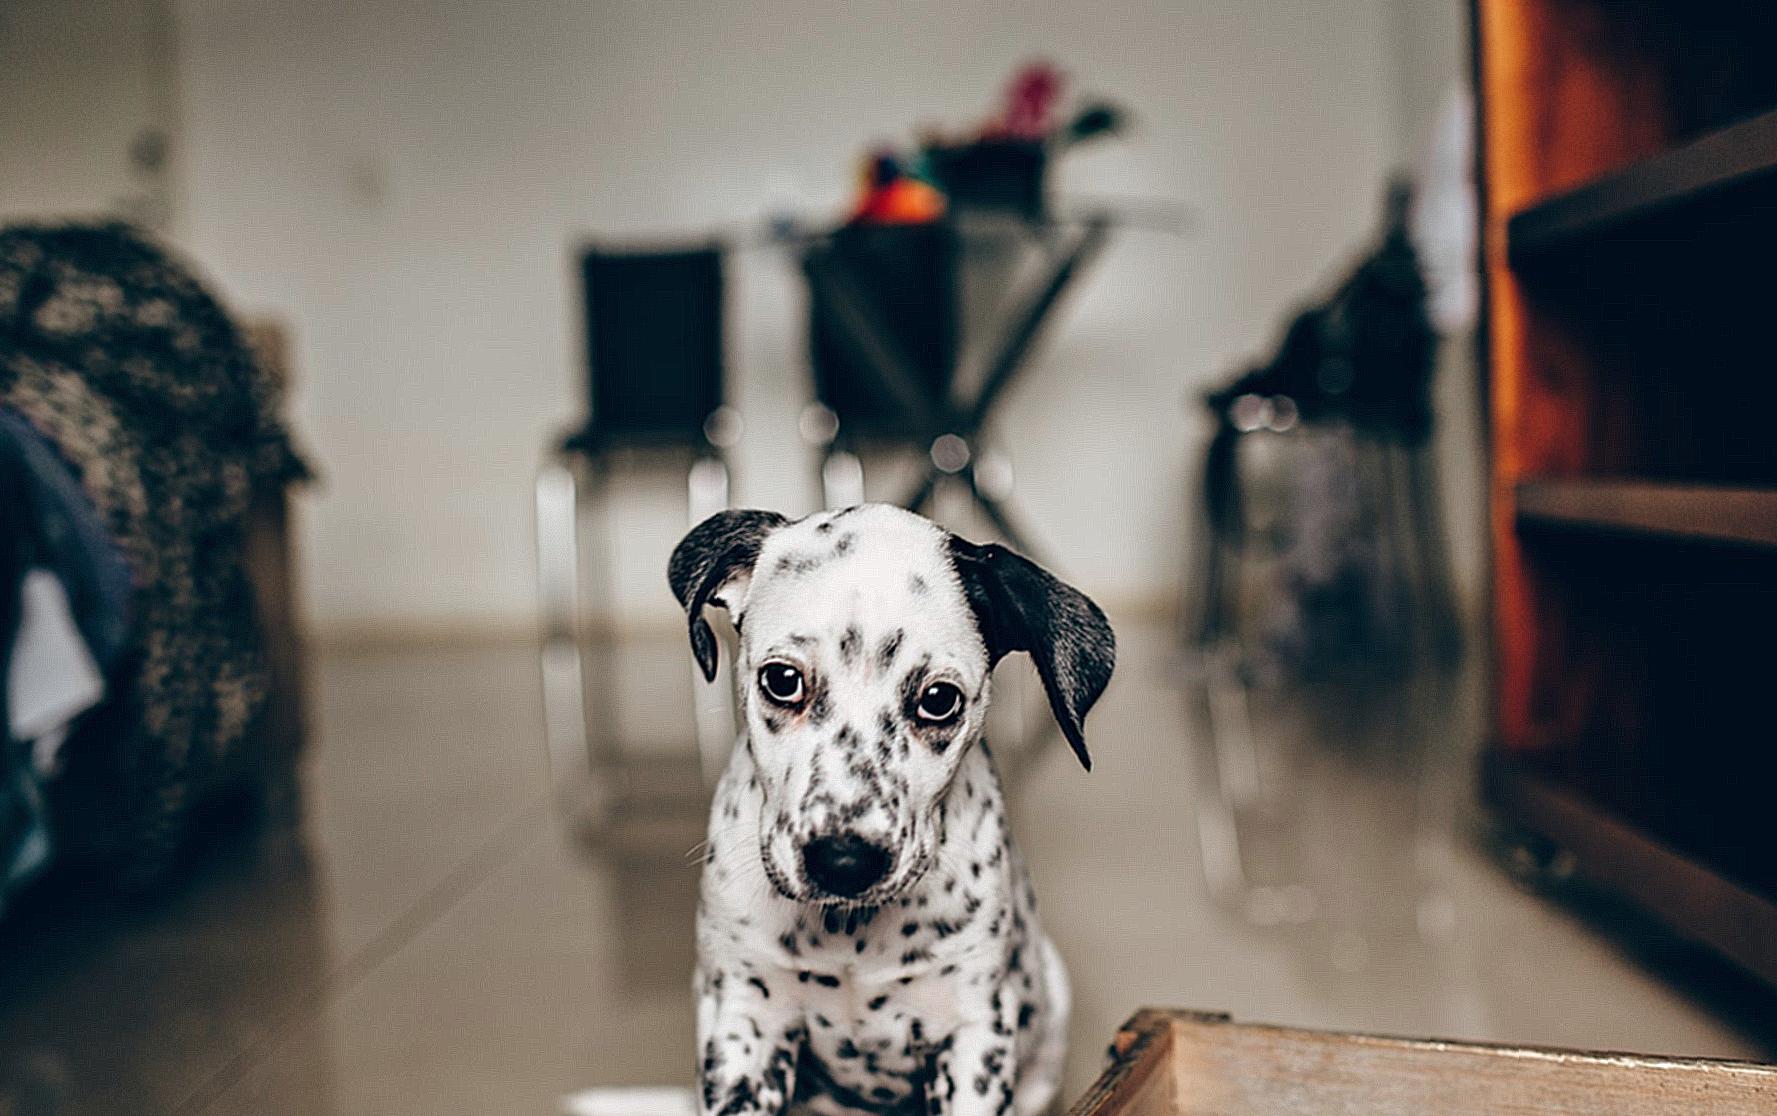 Adorable purebred Dalmatian puppy sitting on floor of bedroom and looking at camera